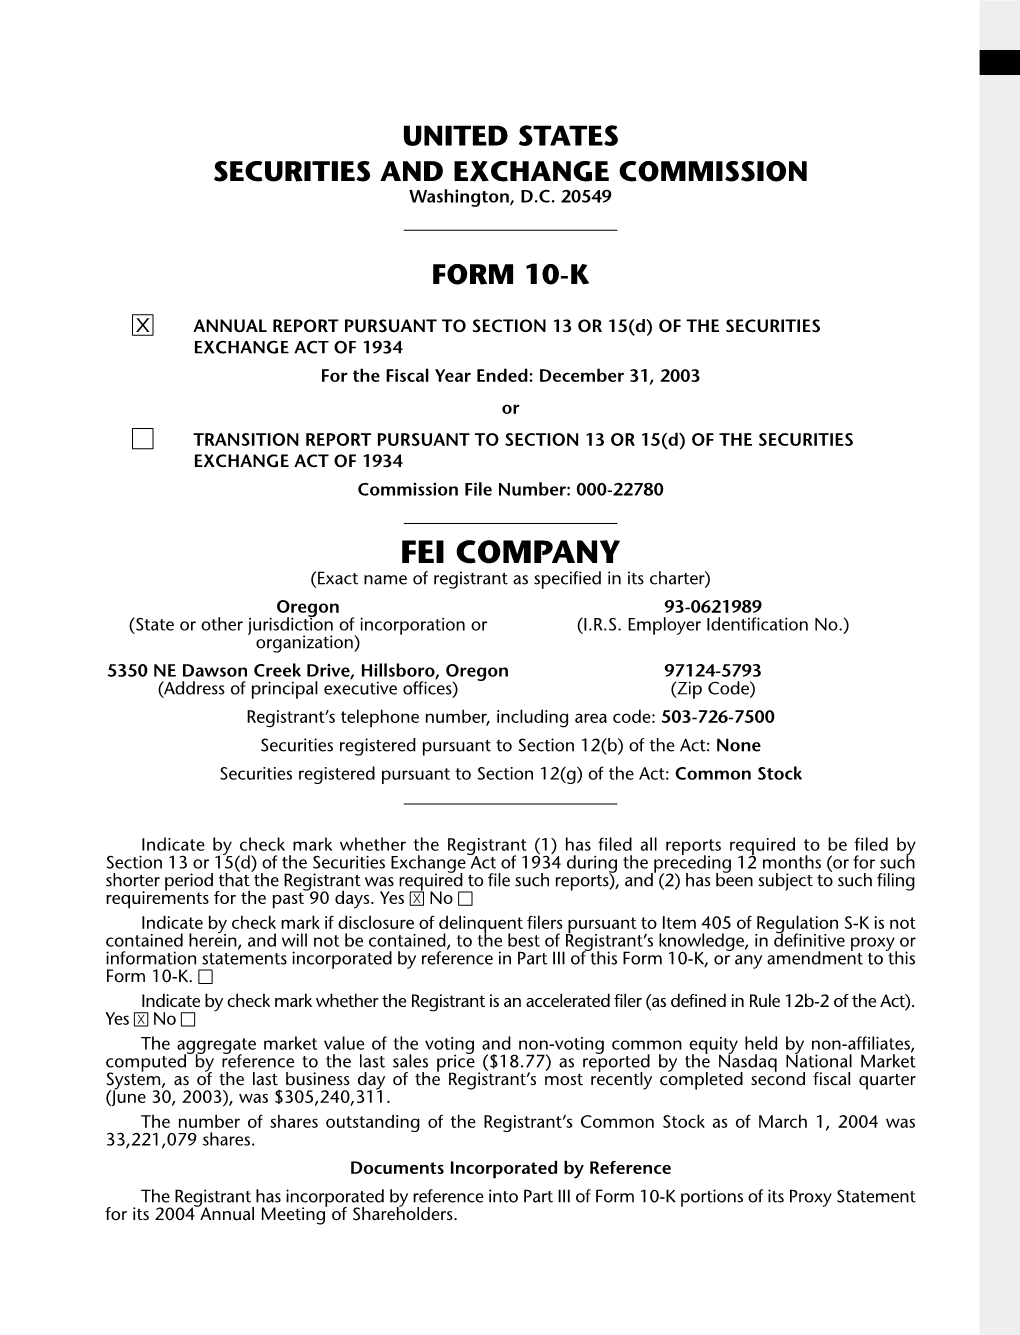 FEI COMPANY (Exact Name of Registrant As Specified in Its Charter) Oregon 93-0621989 (State Or Other Jurisdiction of Incorporation Or (I.R.S